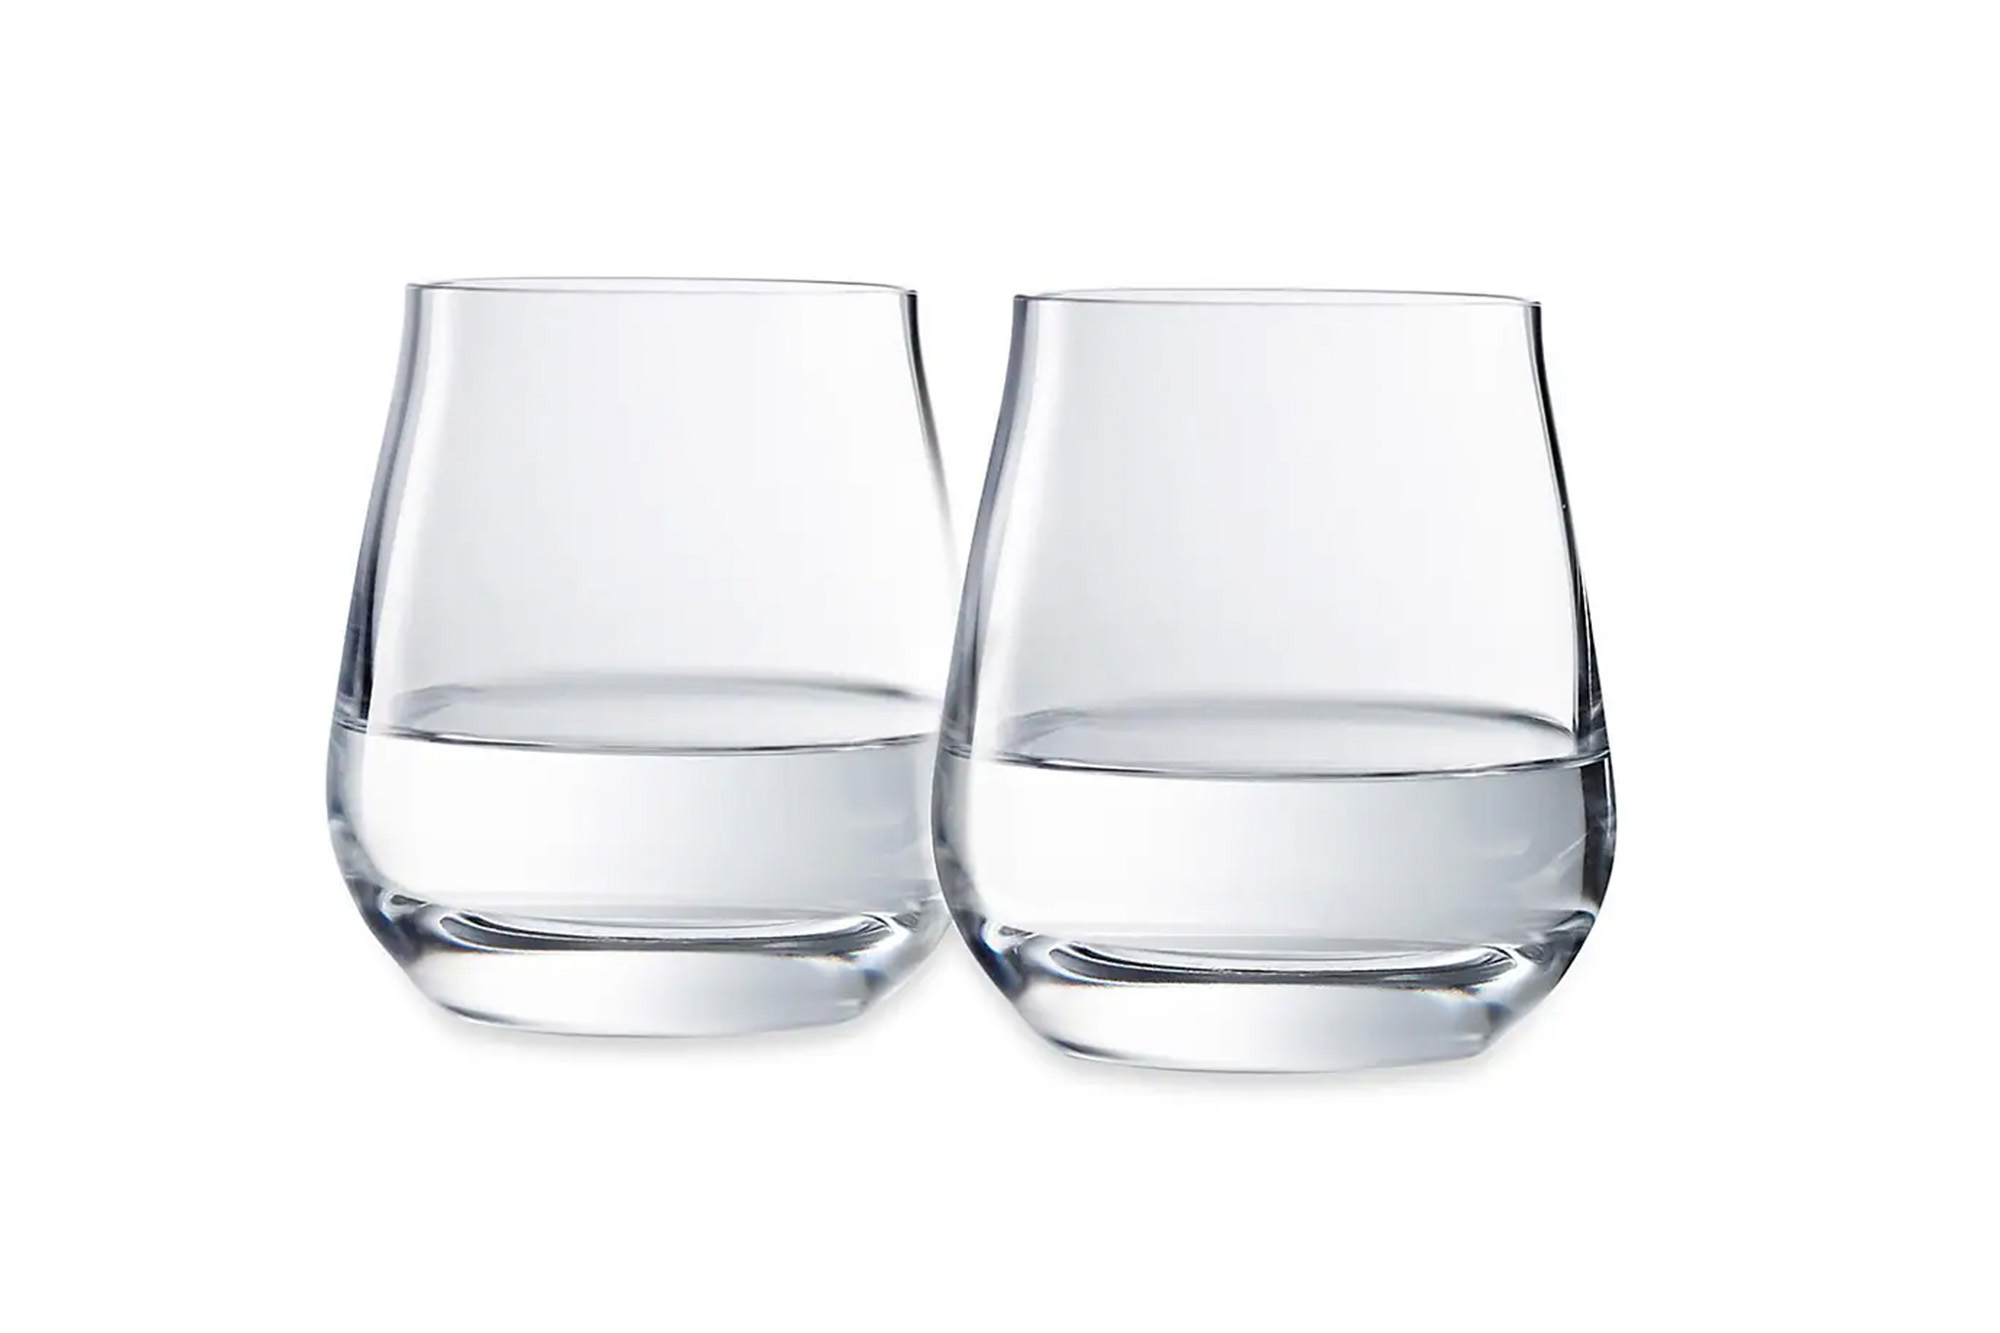 Two Baccarat tumblers